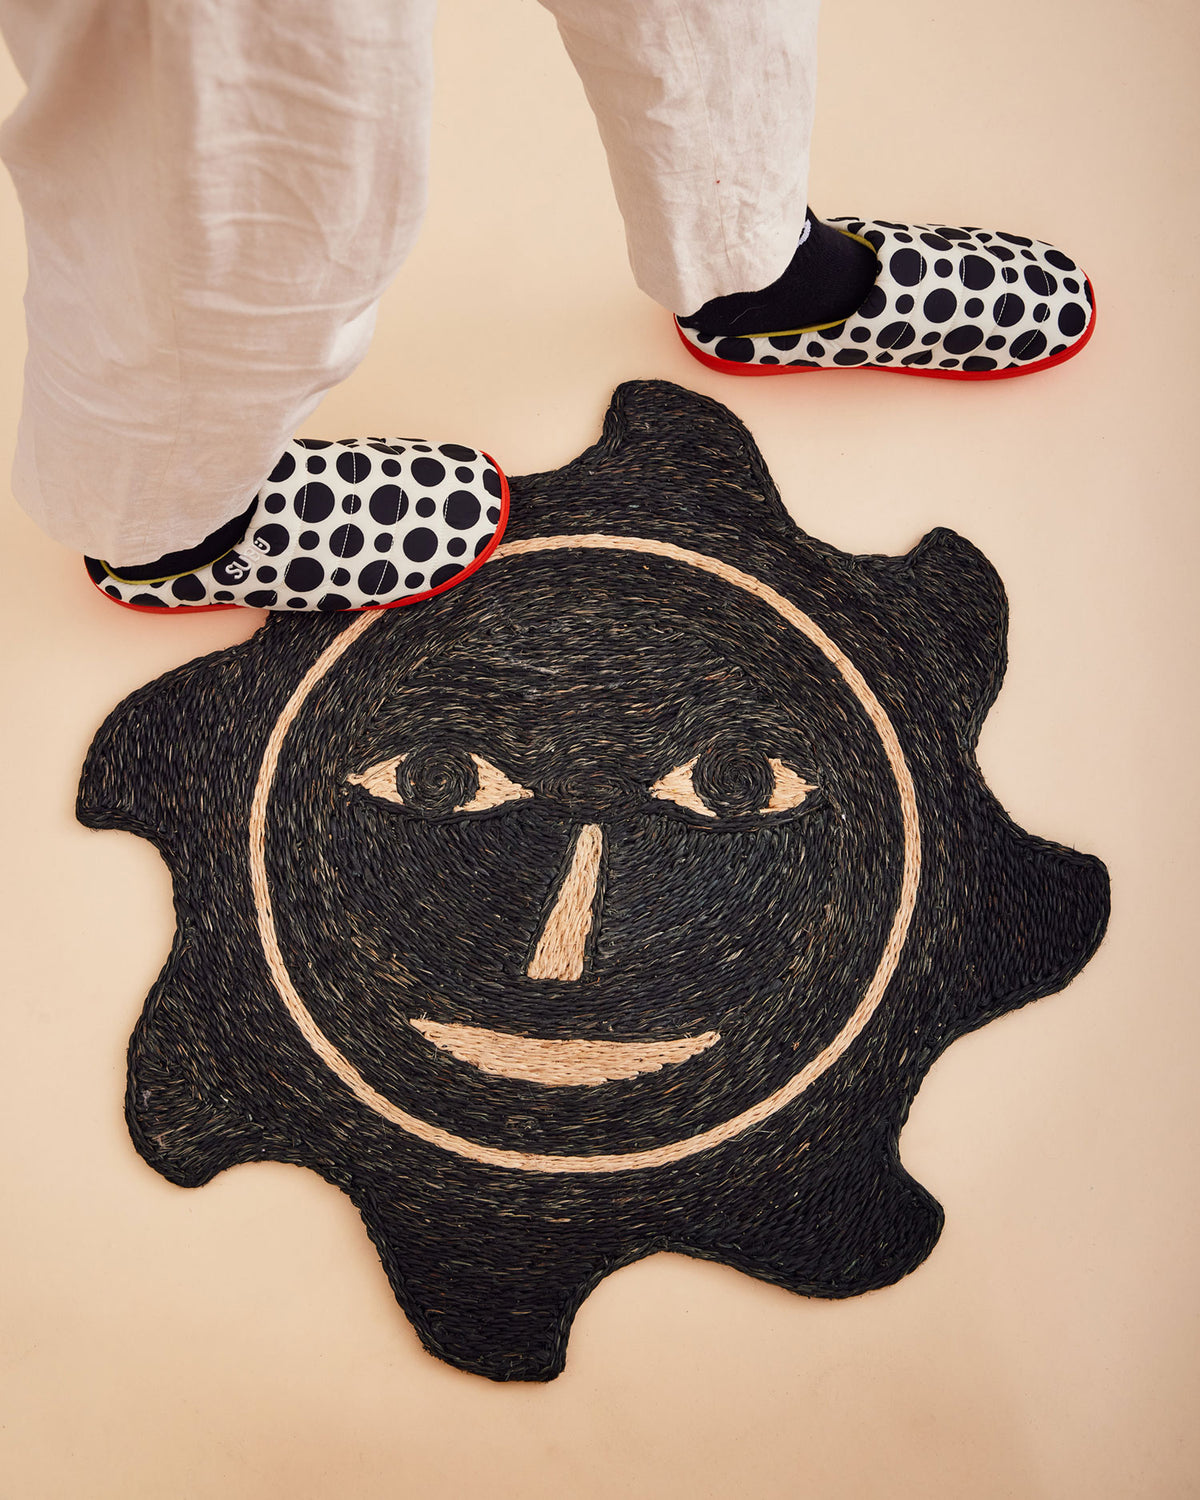 Dusen Dusen Everybody Sun Mat. Doormat made of 100% Handwoven Abaca fiber in the signature Everybody Face design. Made in Philippines. Dry, indoor use is recommended. Vacuum regularly, spot clean as needed.